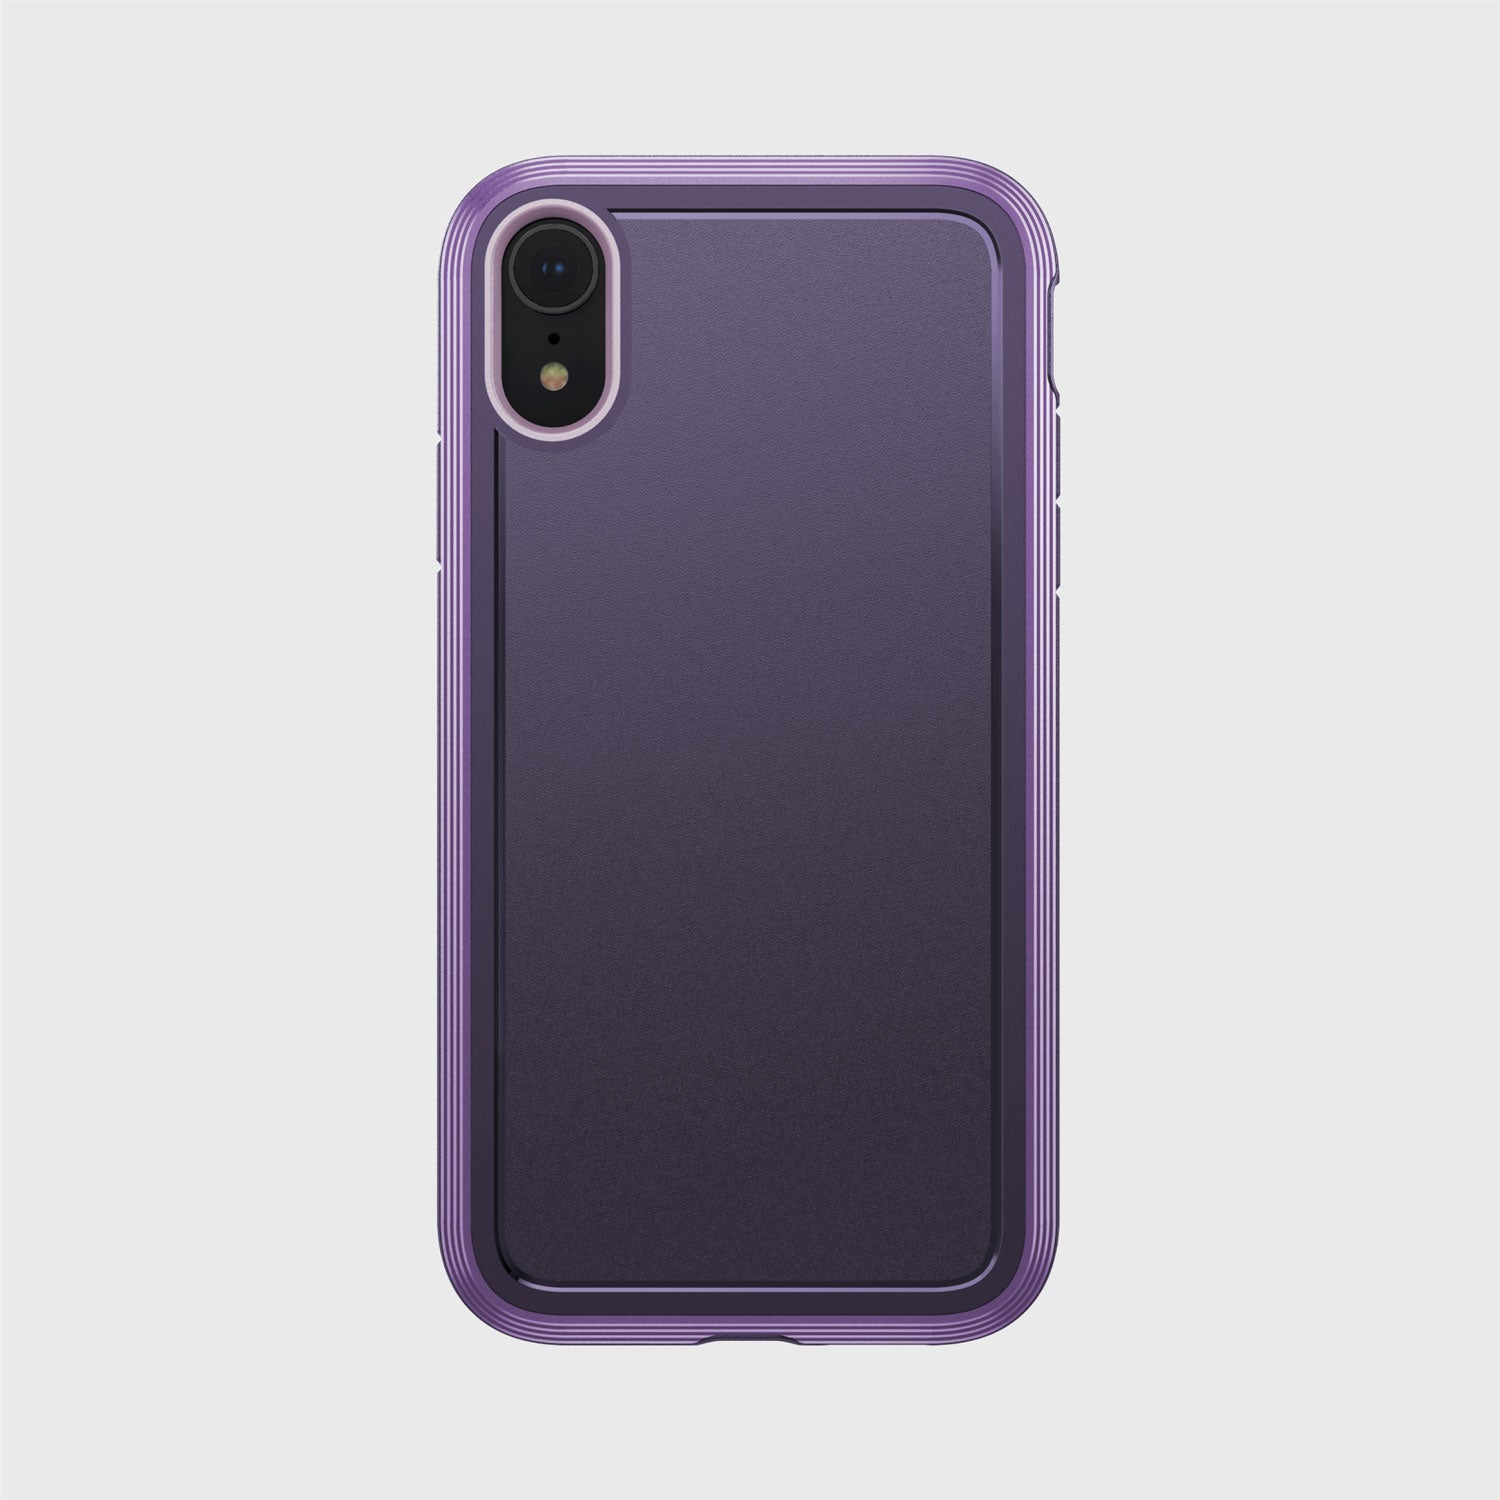 The Raptic ULTRA case provides excellent device protection for your iPhone XR. This purple case stands out on a clean white background.